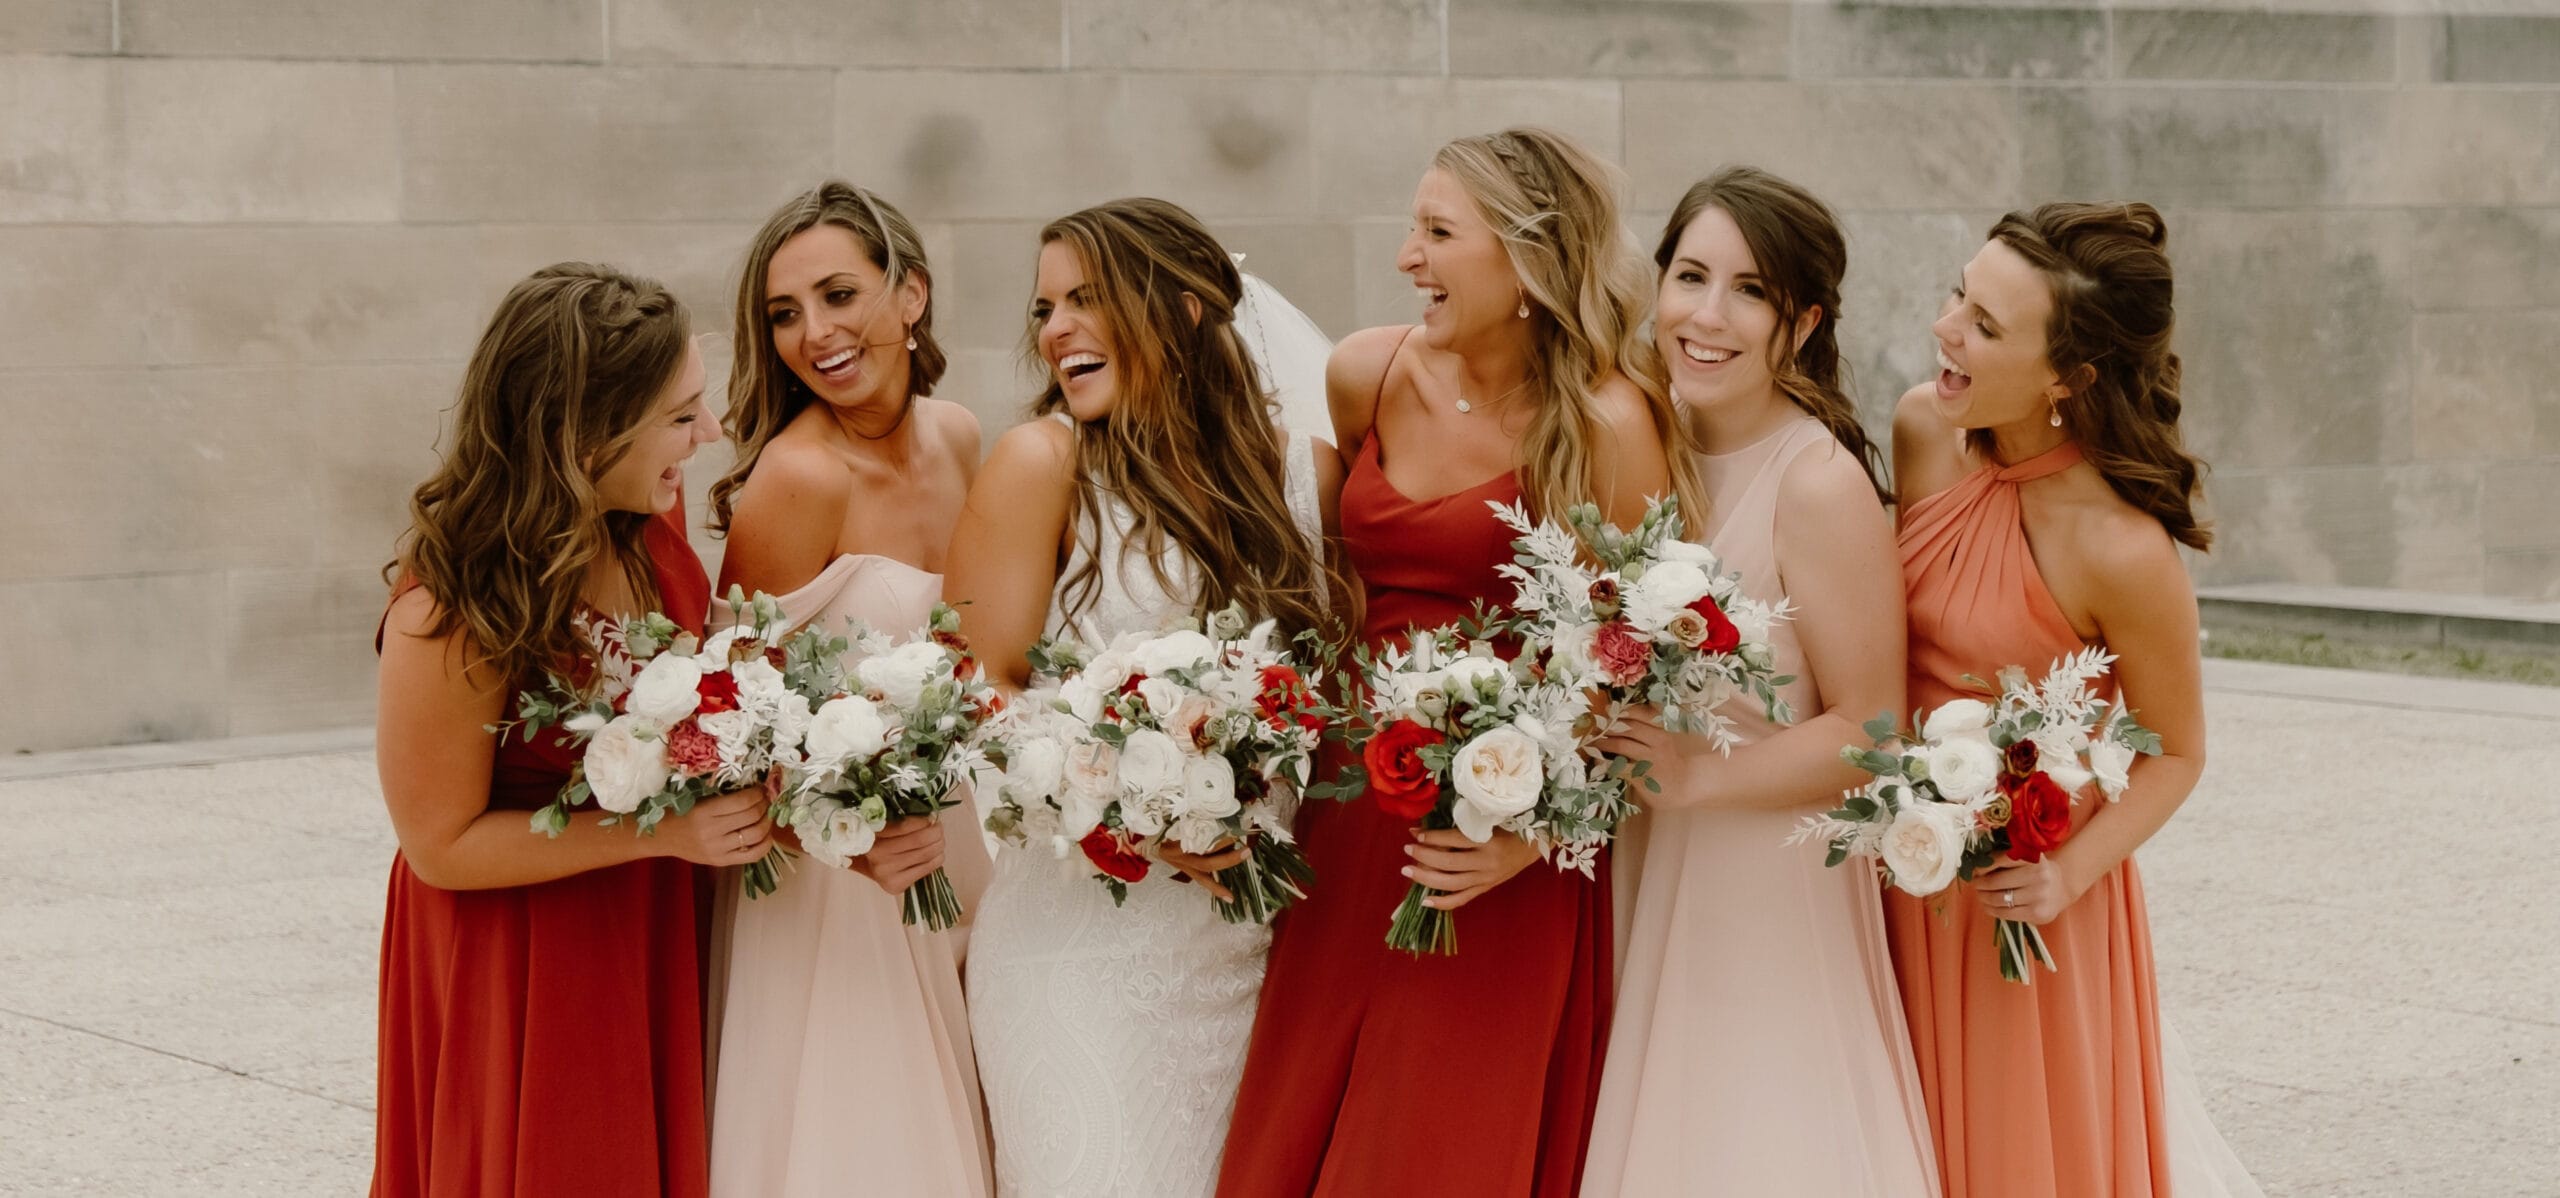 https://wedkc.com/wp-content/uploads/2021/06/Ways-to-Help-Your-Bridal-Party-Enjoy-Your-Wedding-scaled.jpg